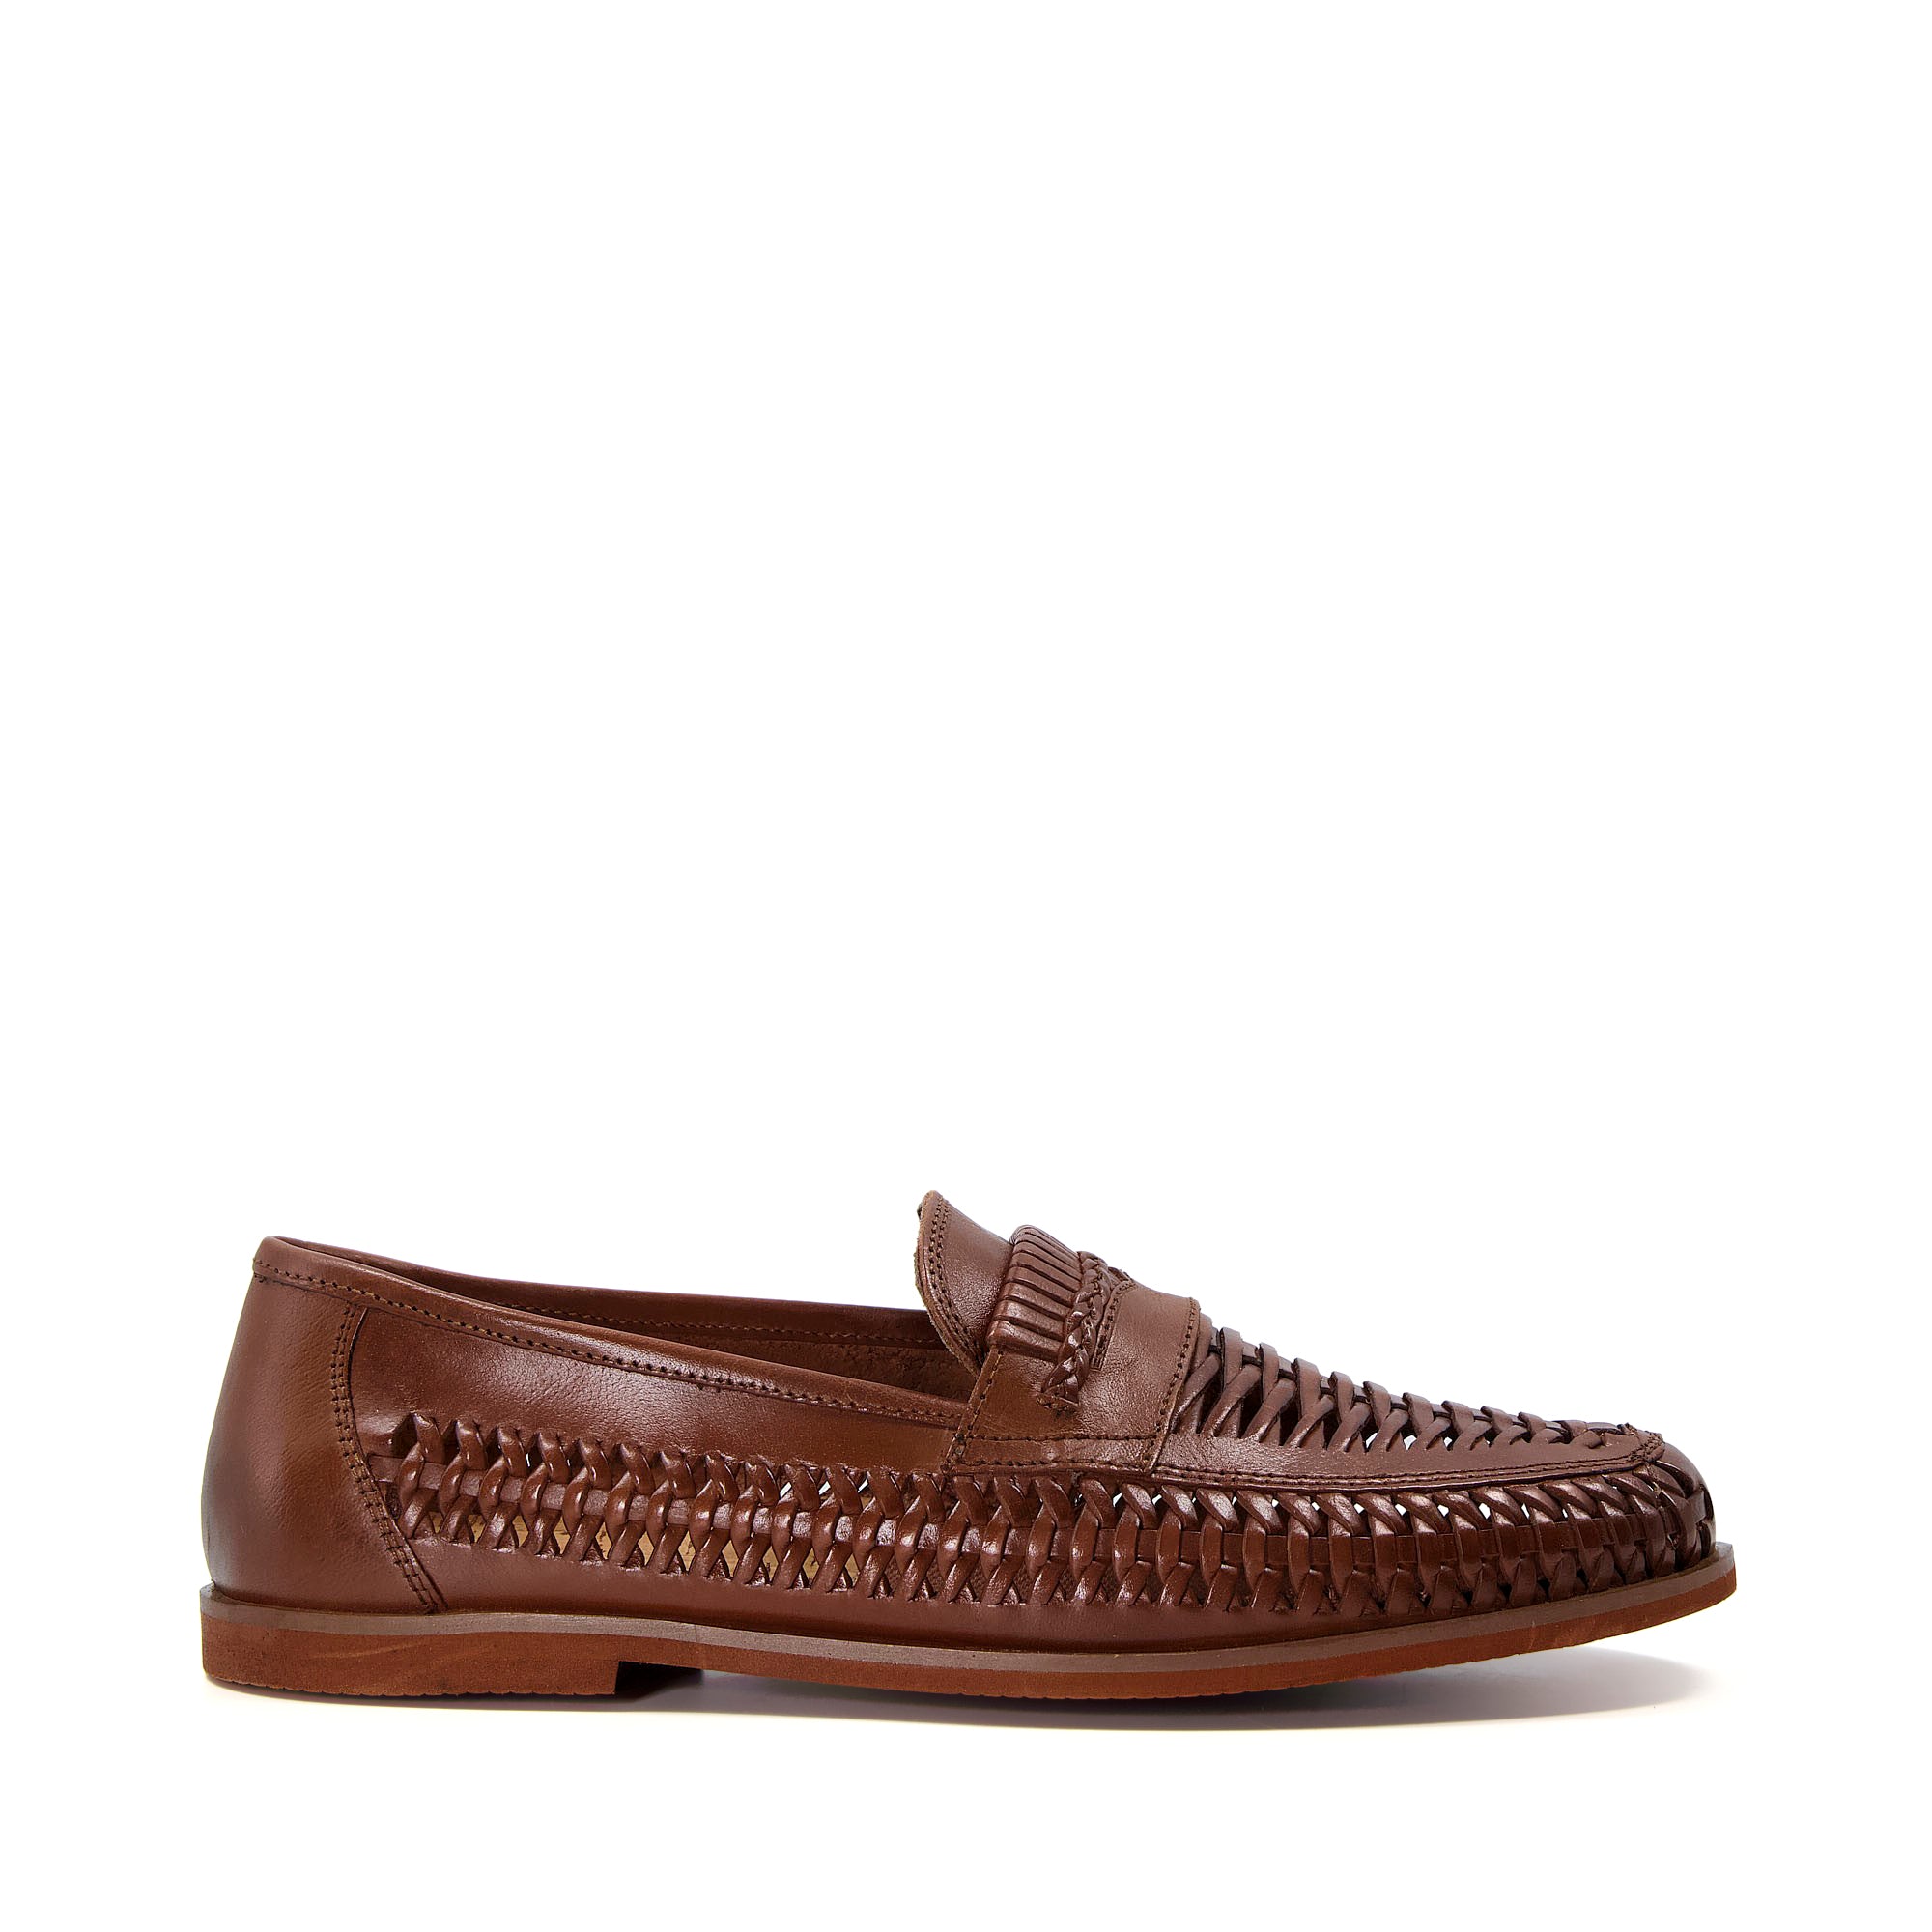 BRIGHTON ROCK - Woven Leather Loafer